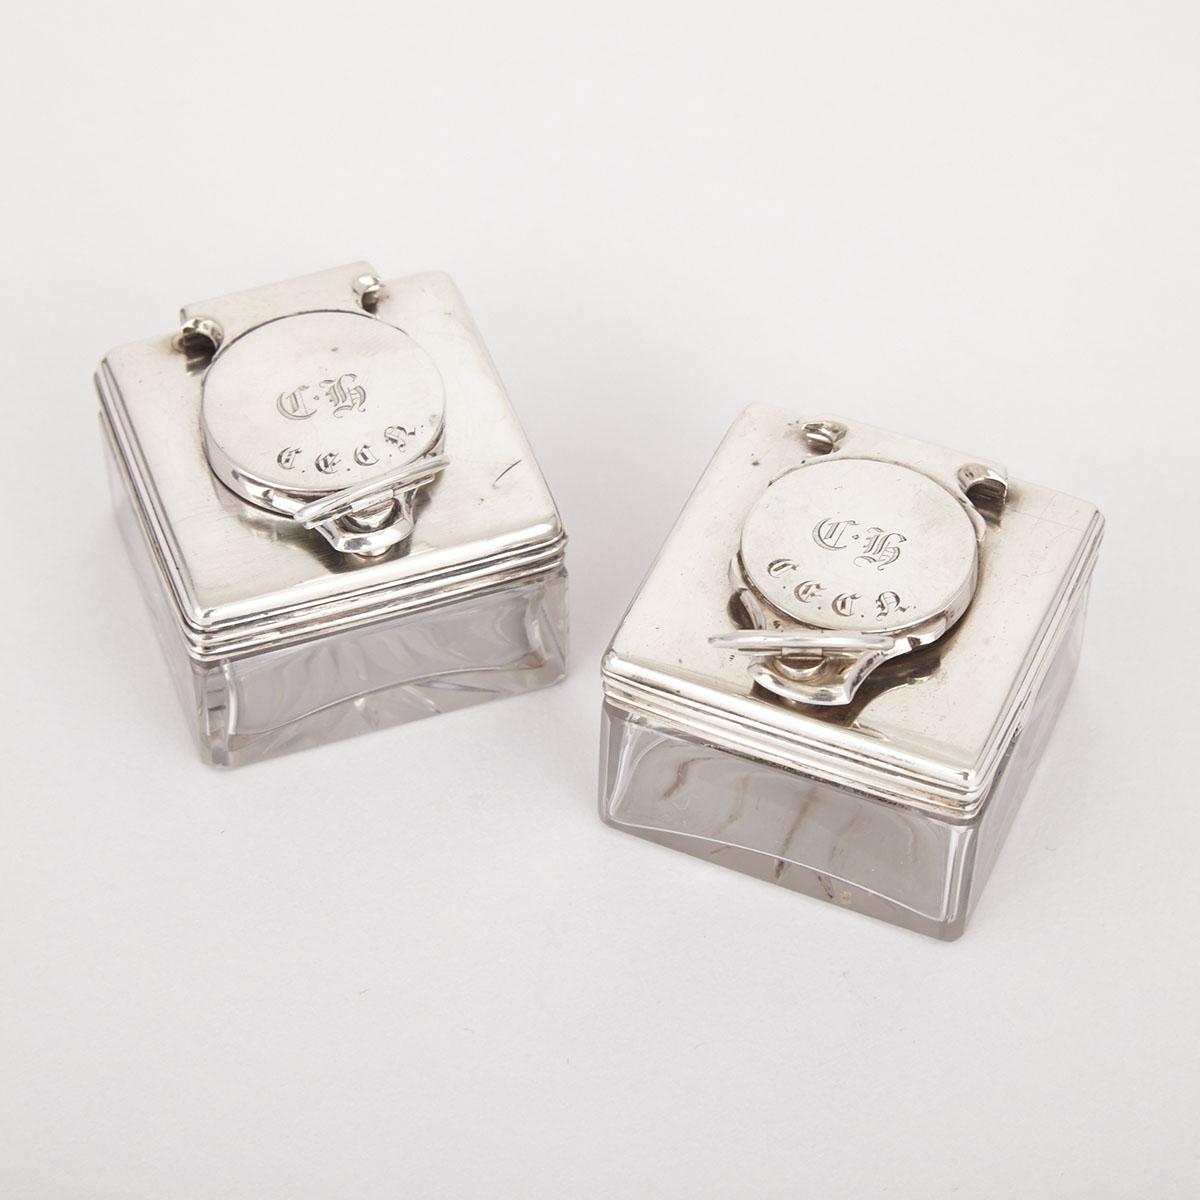 Two Victorian Silver and Glass Traveling Inkwells, London, 1838/39